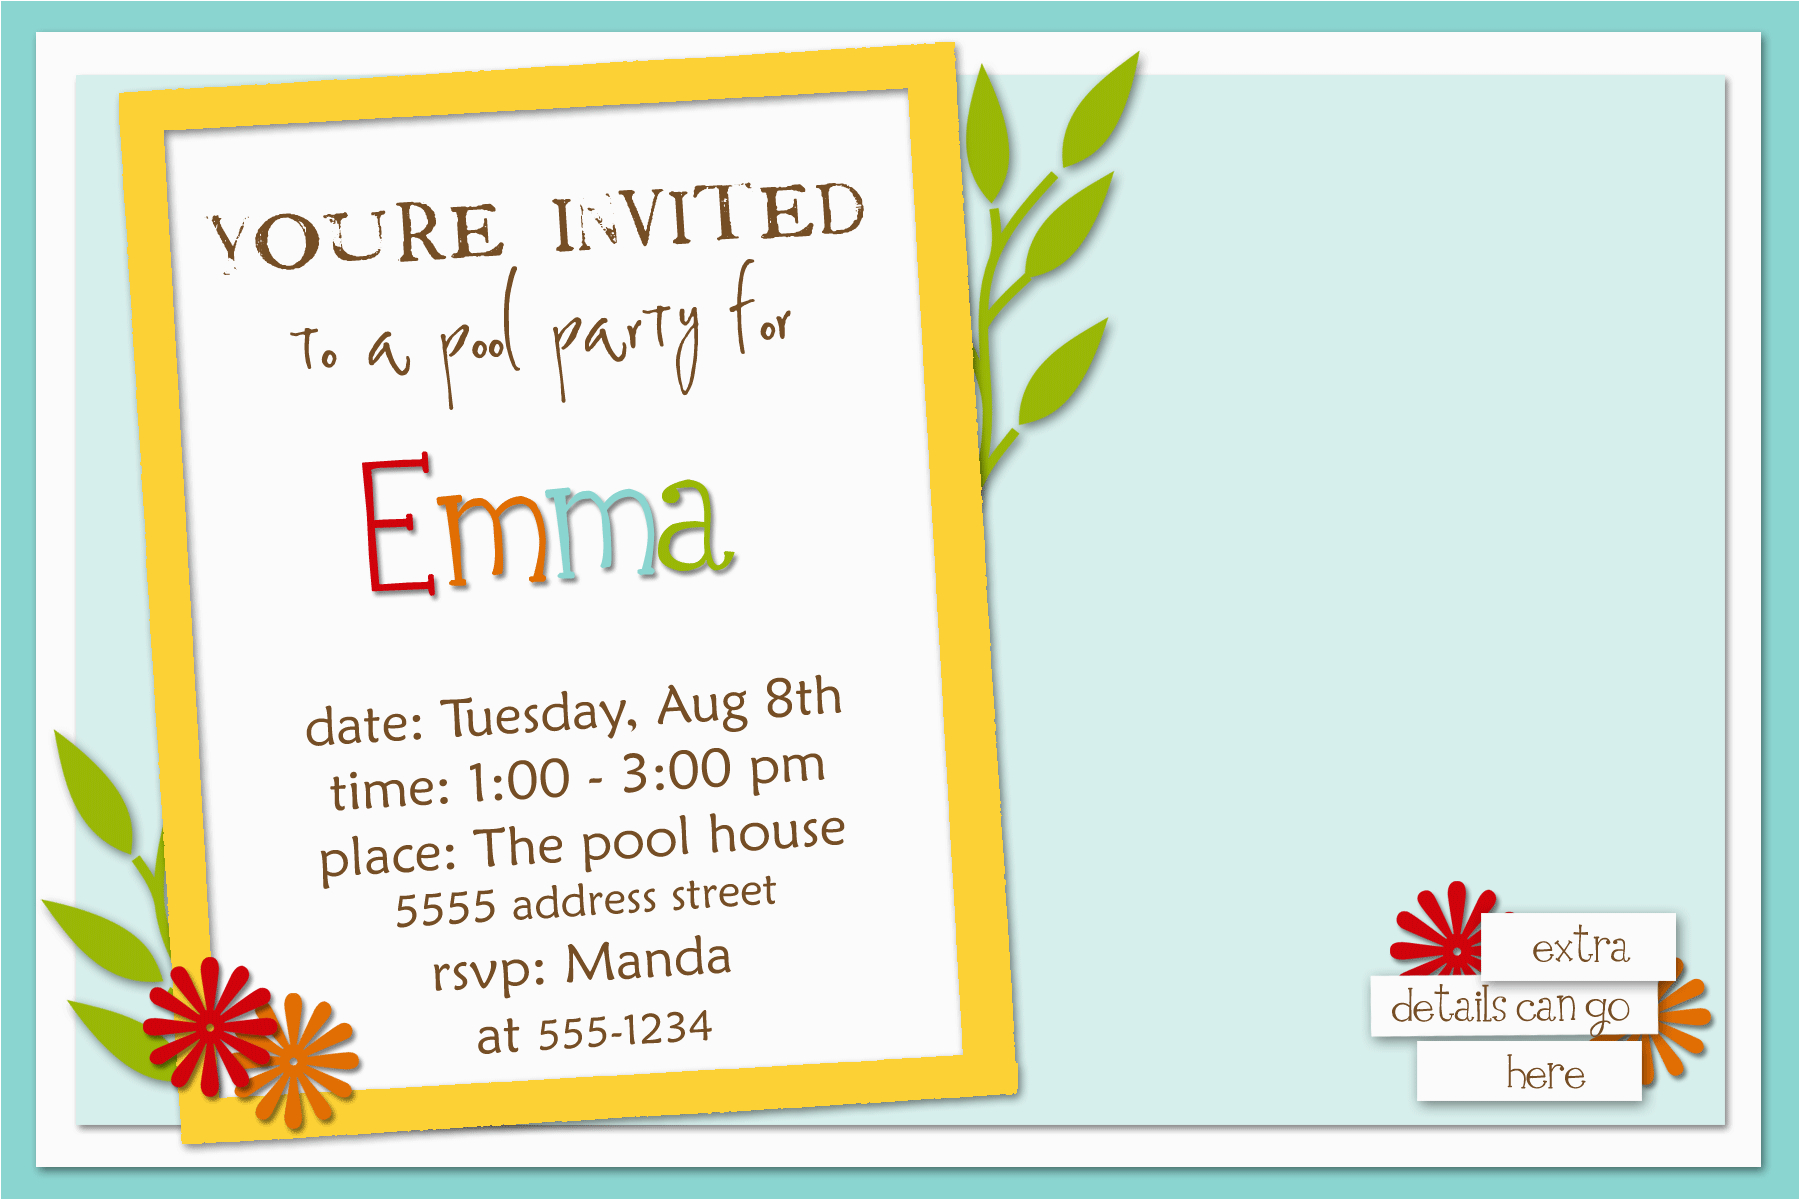 How to Write Invitation for Birthday Party Example How to Write A Birthday Invitation Eysachsephoto Com